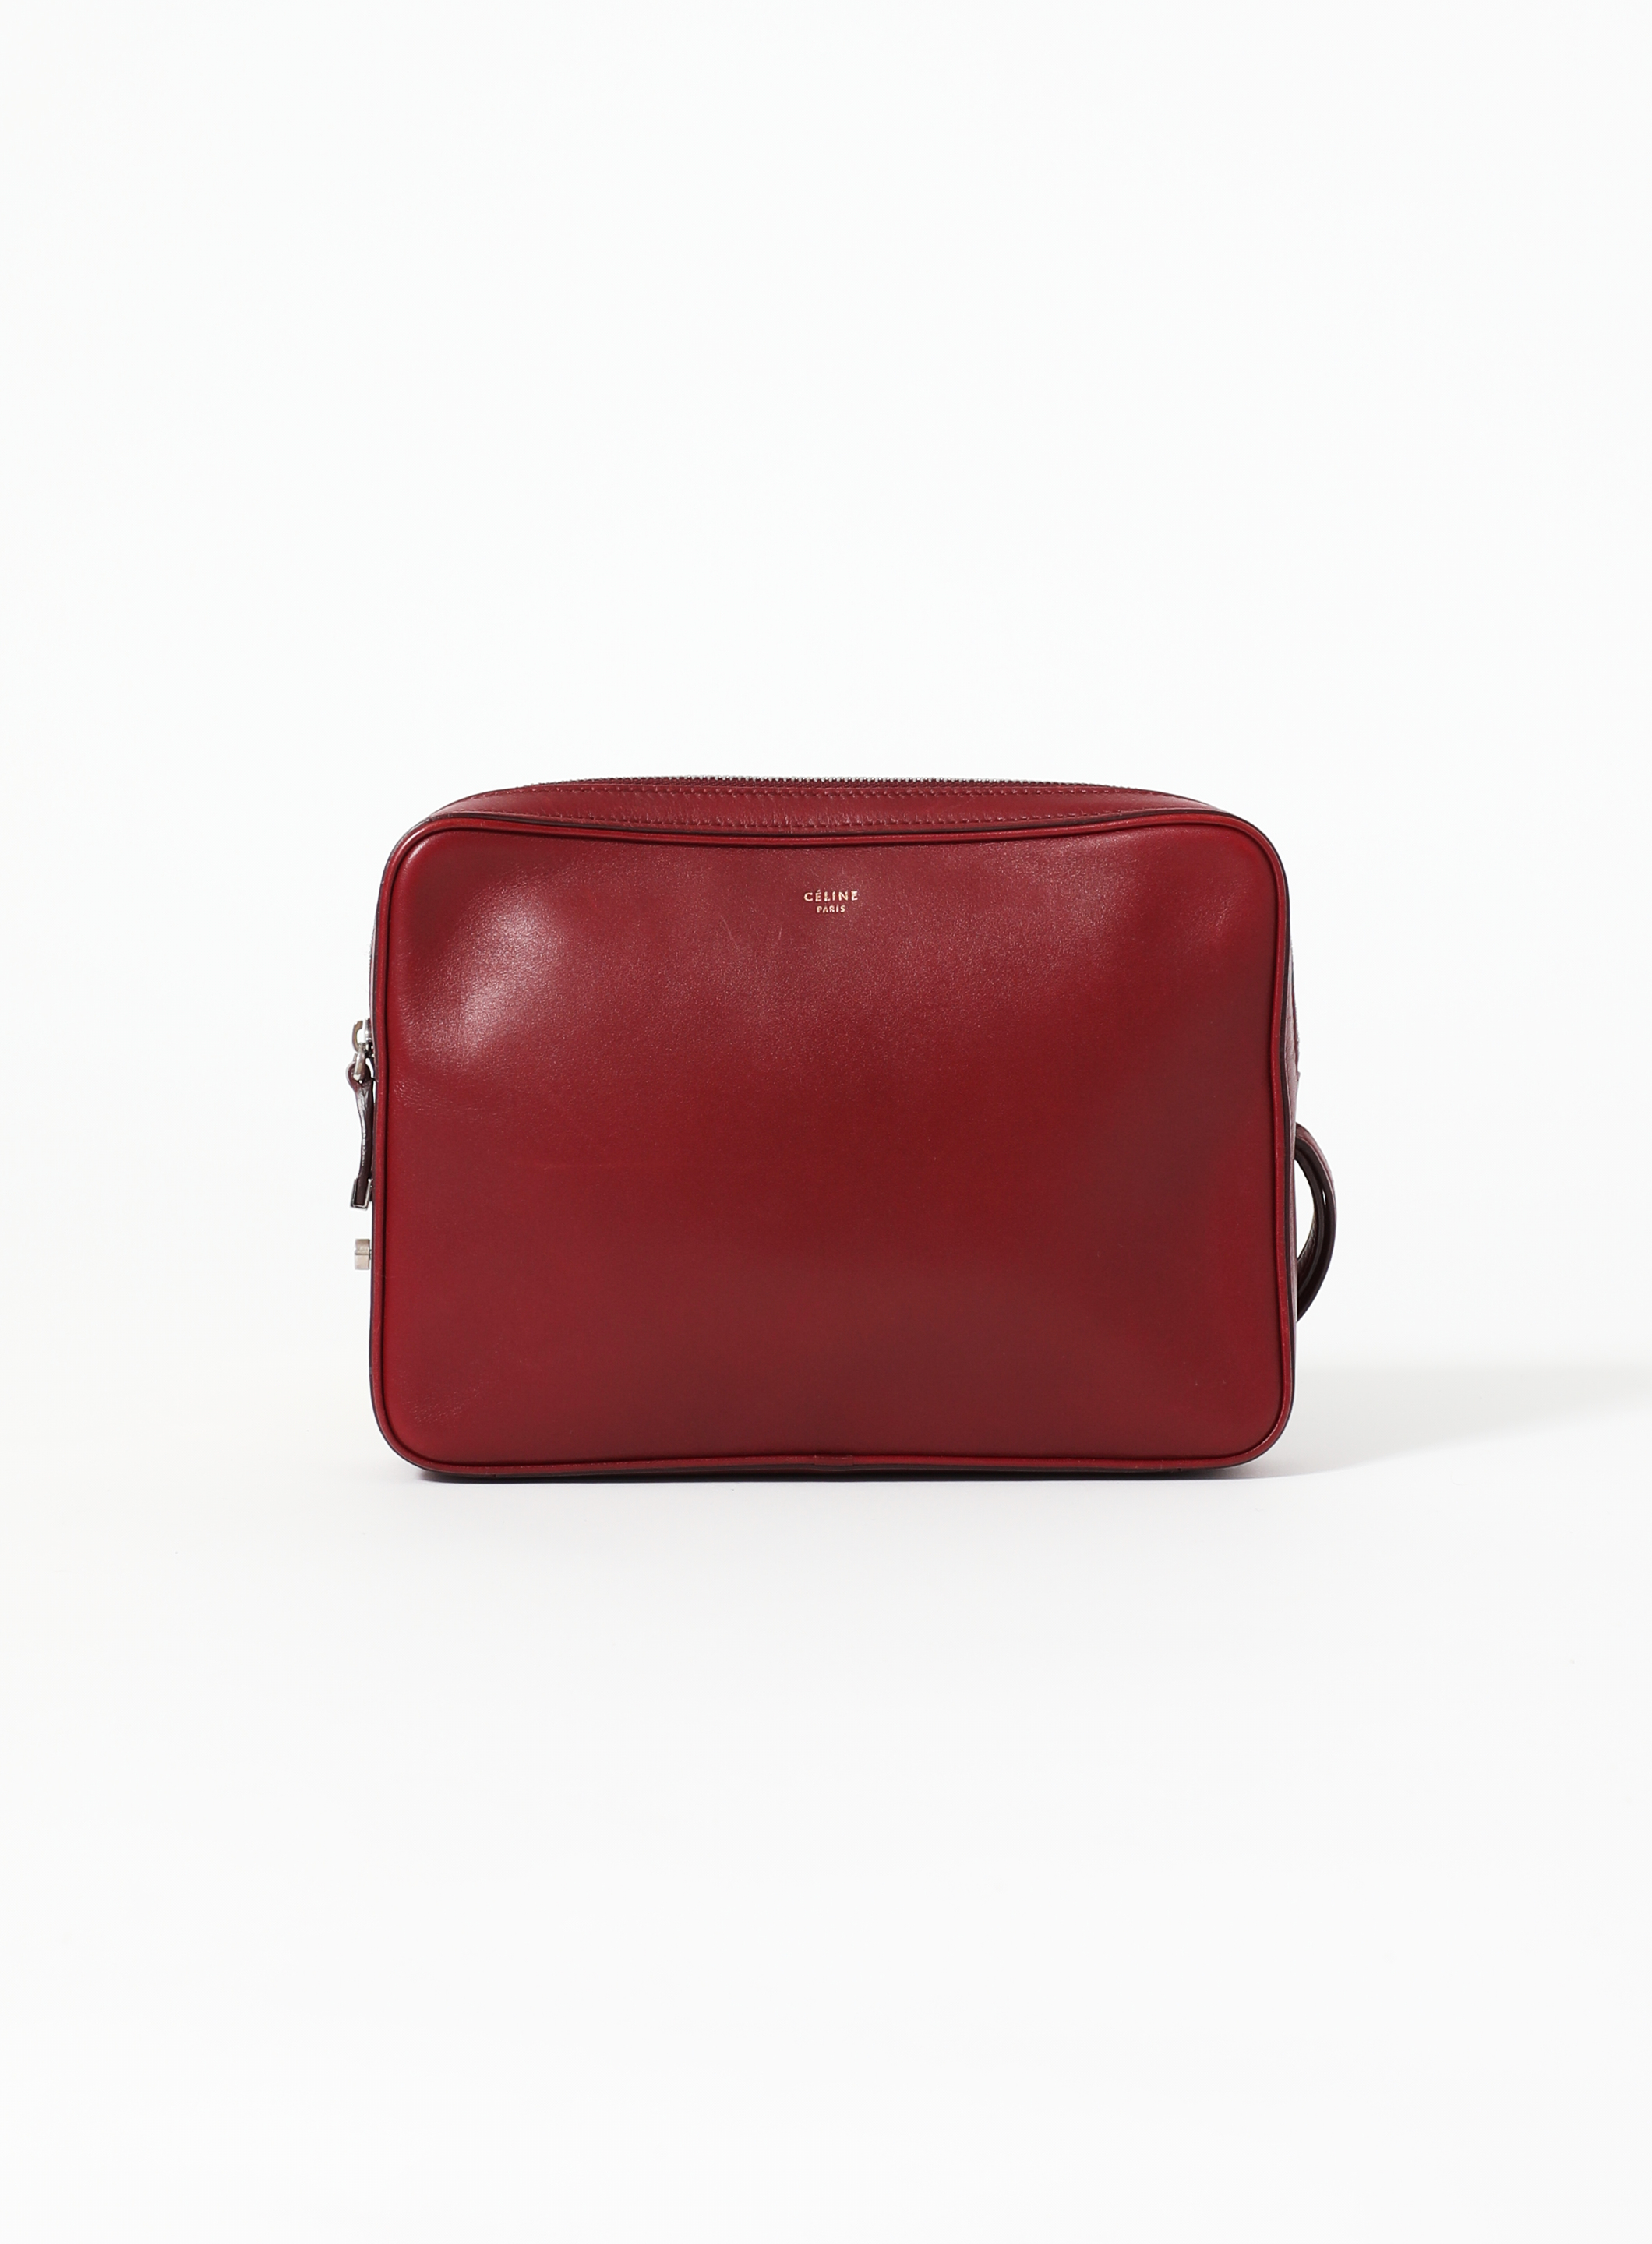 Burgundy Clutch | Authentic & Vintage | ReSEE